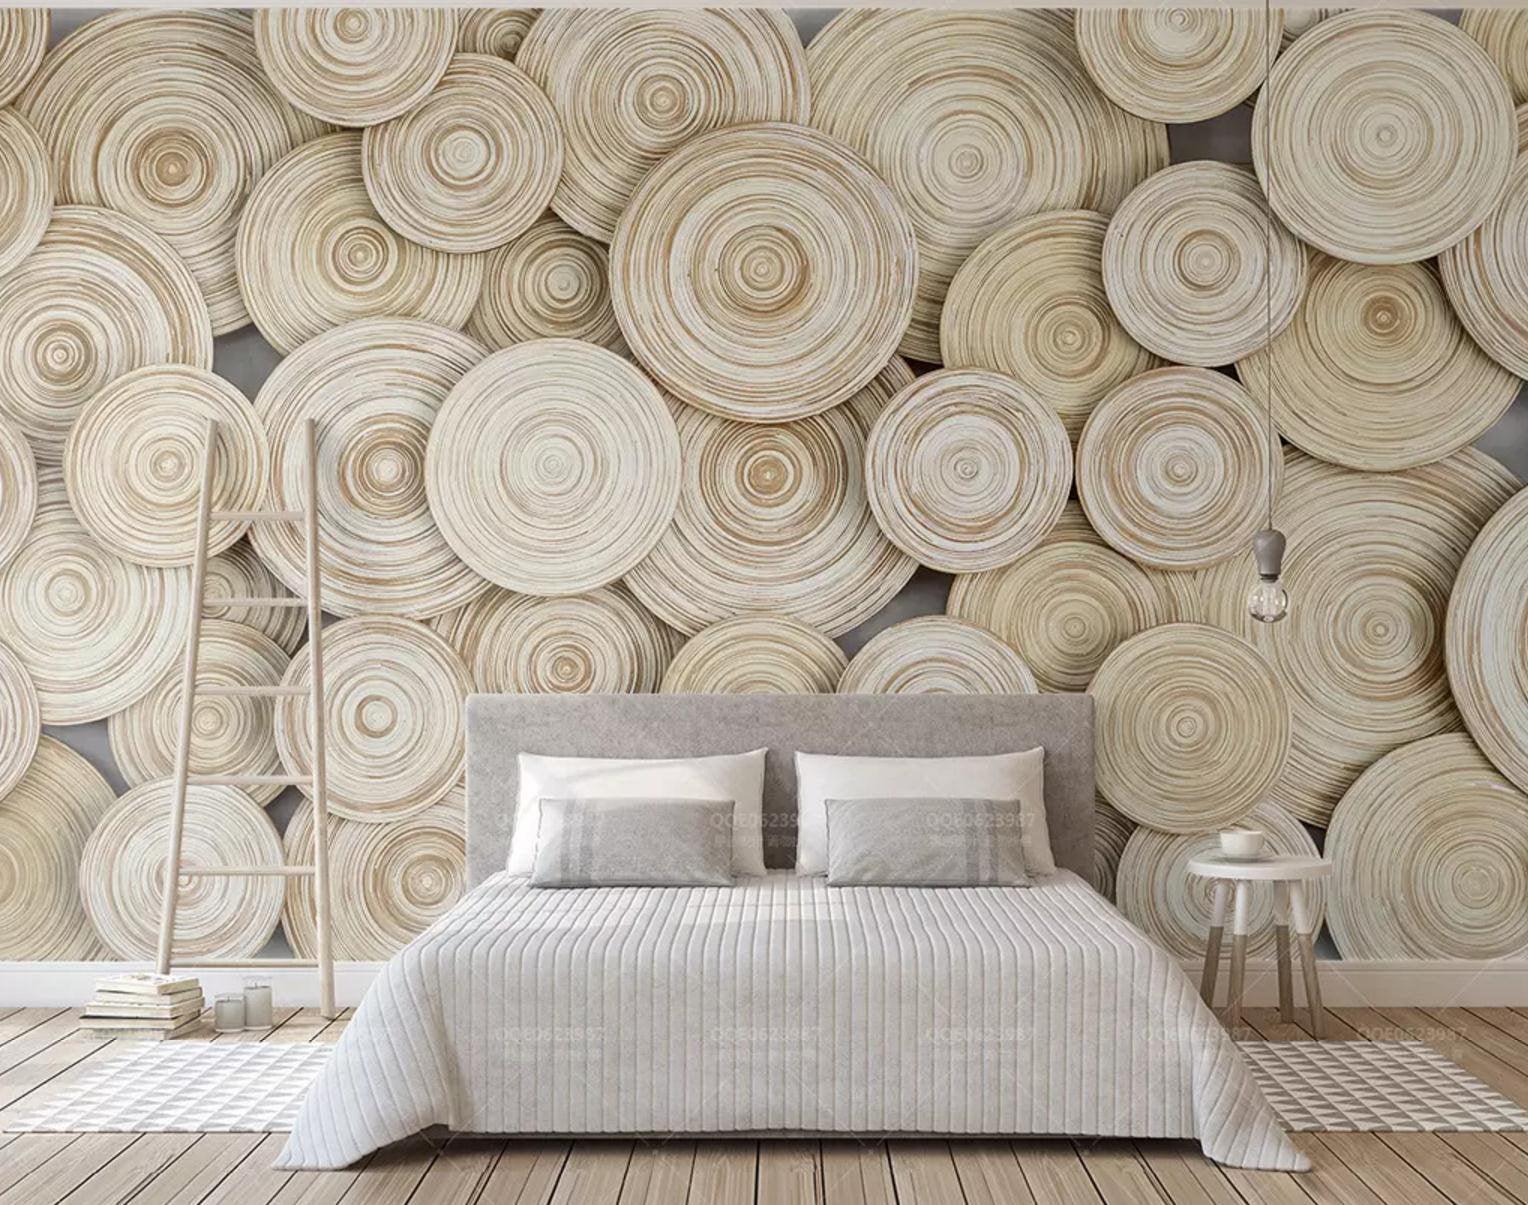 3D Abstract, overlapping, wood grain Wallpaper,Removable Self Adhesive Wallpaper,Wall Mural,Vintage art,Peel and Stick- Jess Art Decoration